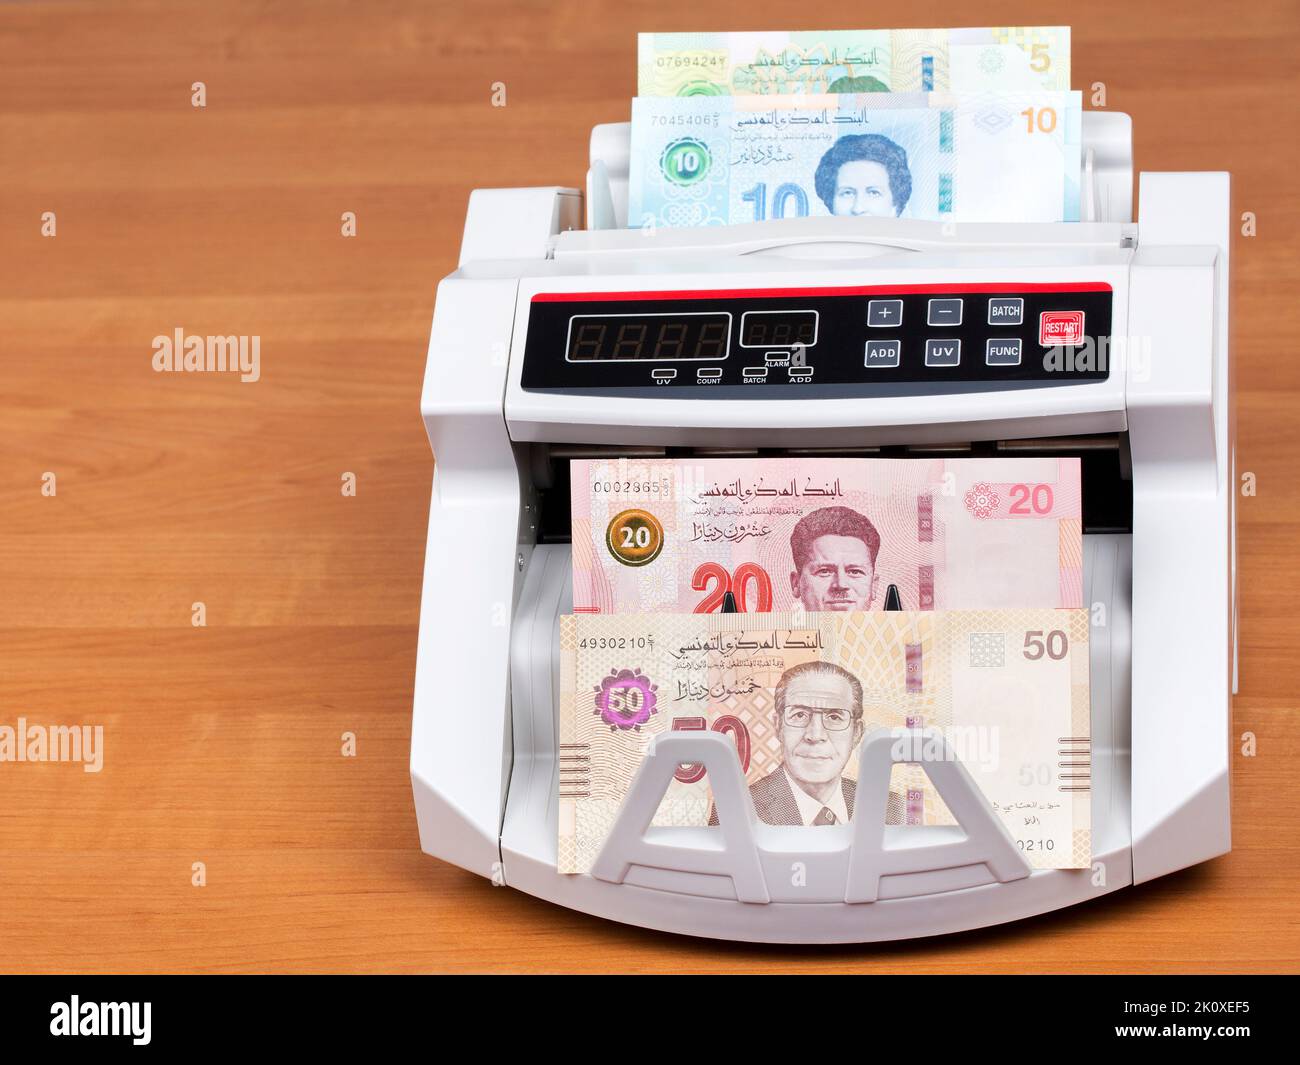 Tunisian money - Dinars  in a counting machine Stock Photo